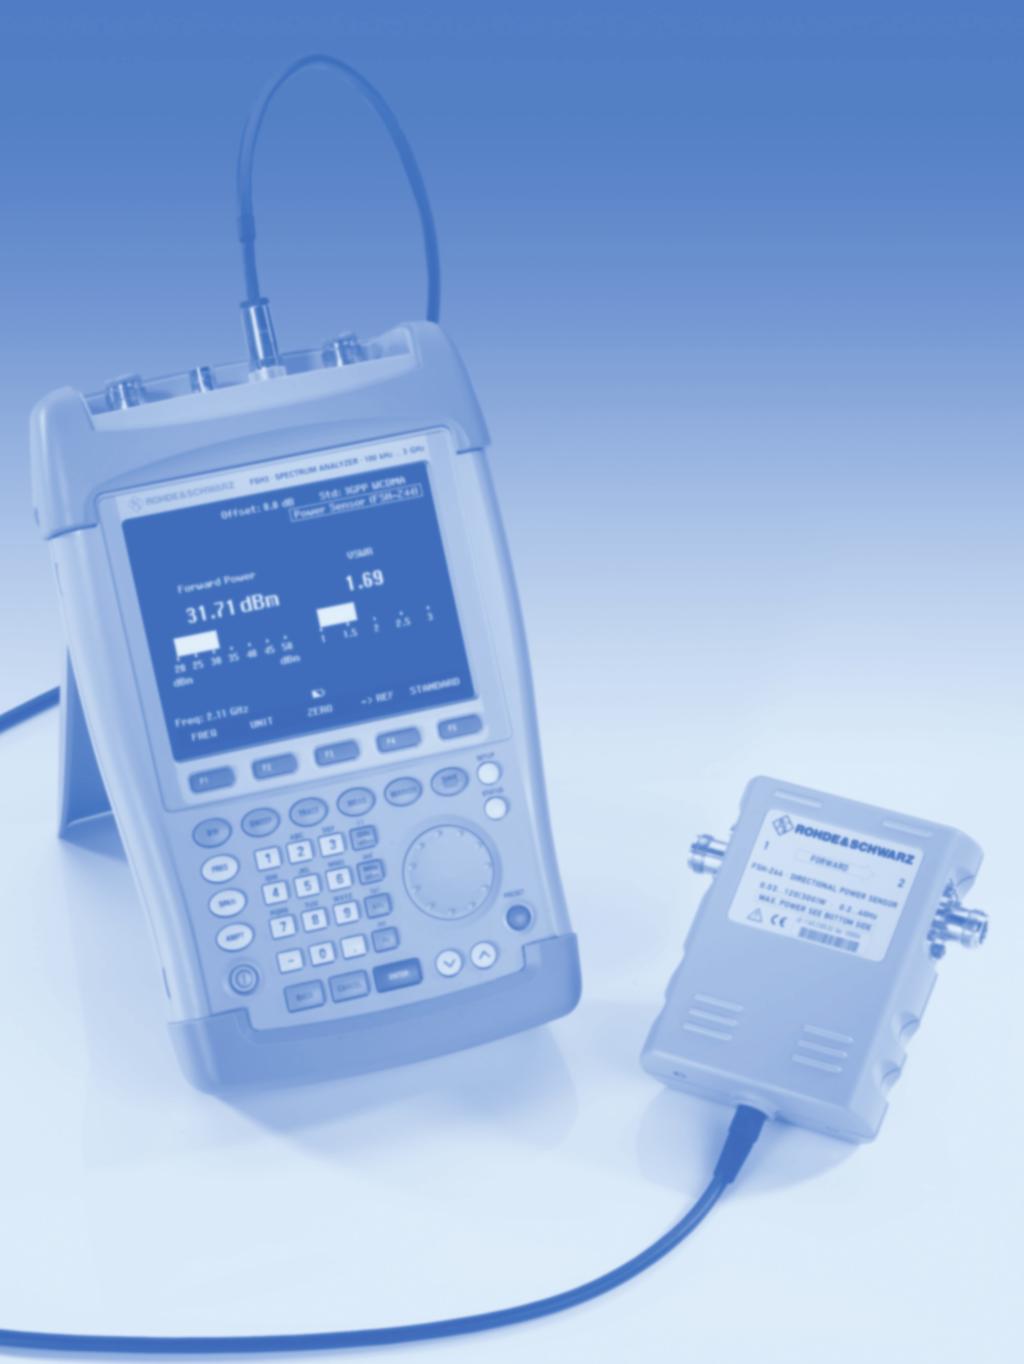 GENERAL PURPOSE Spectrum analyzers Additional new features 44074 / 3 FIG 4 The R&S FSH3 with the new Directional